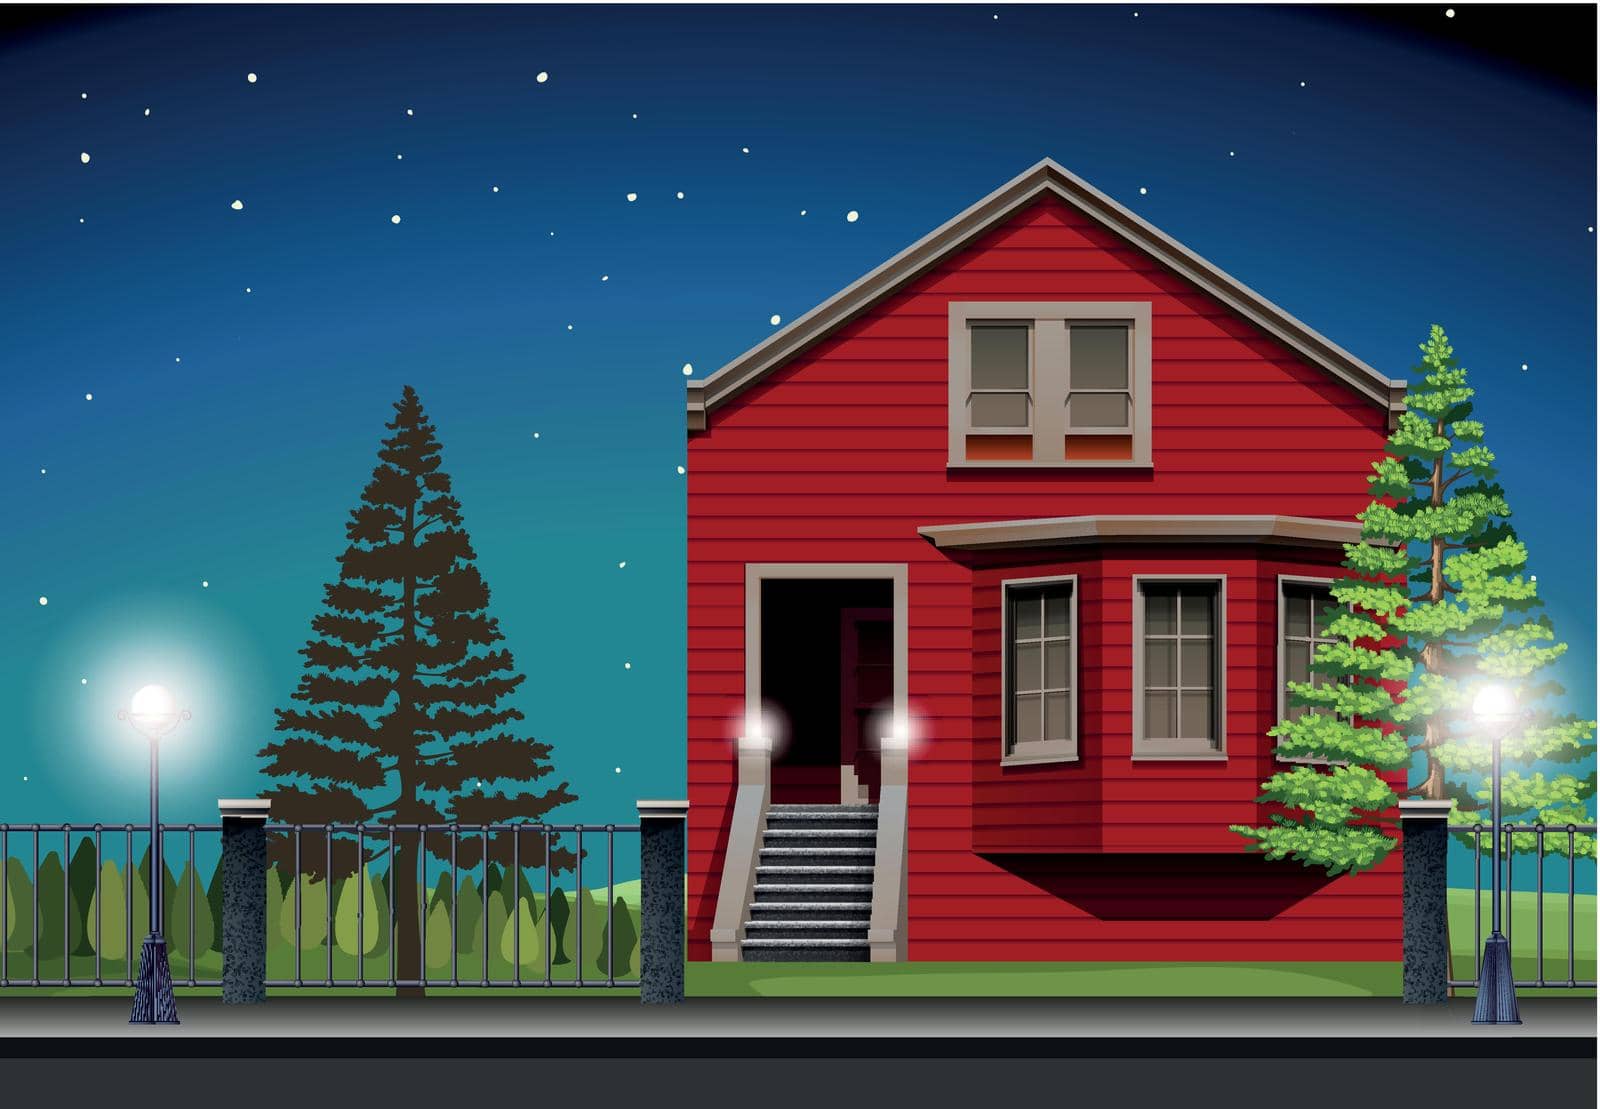 Private house at night time illustration